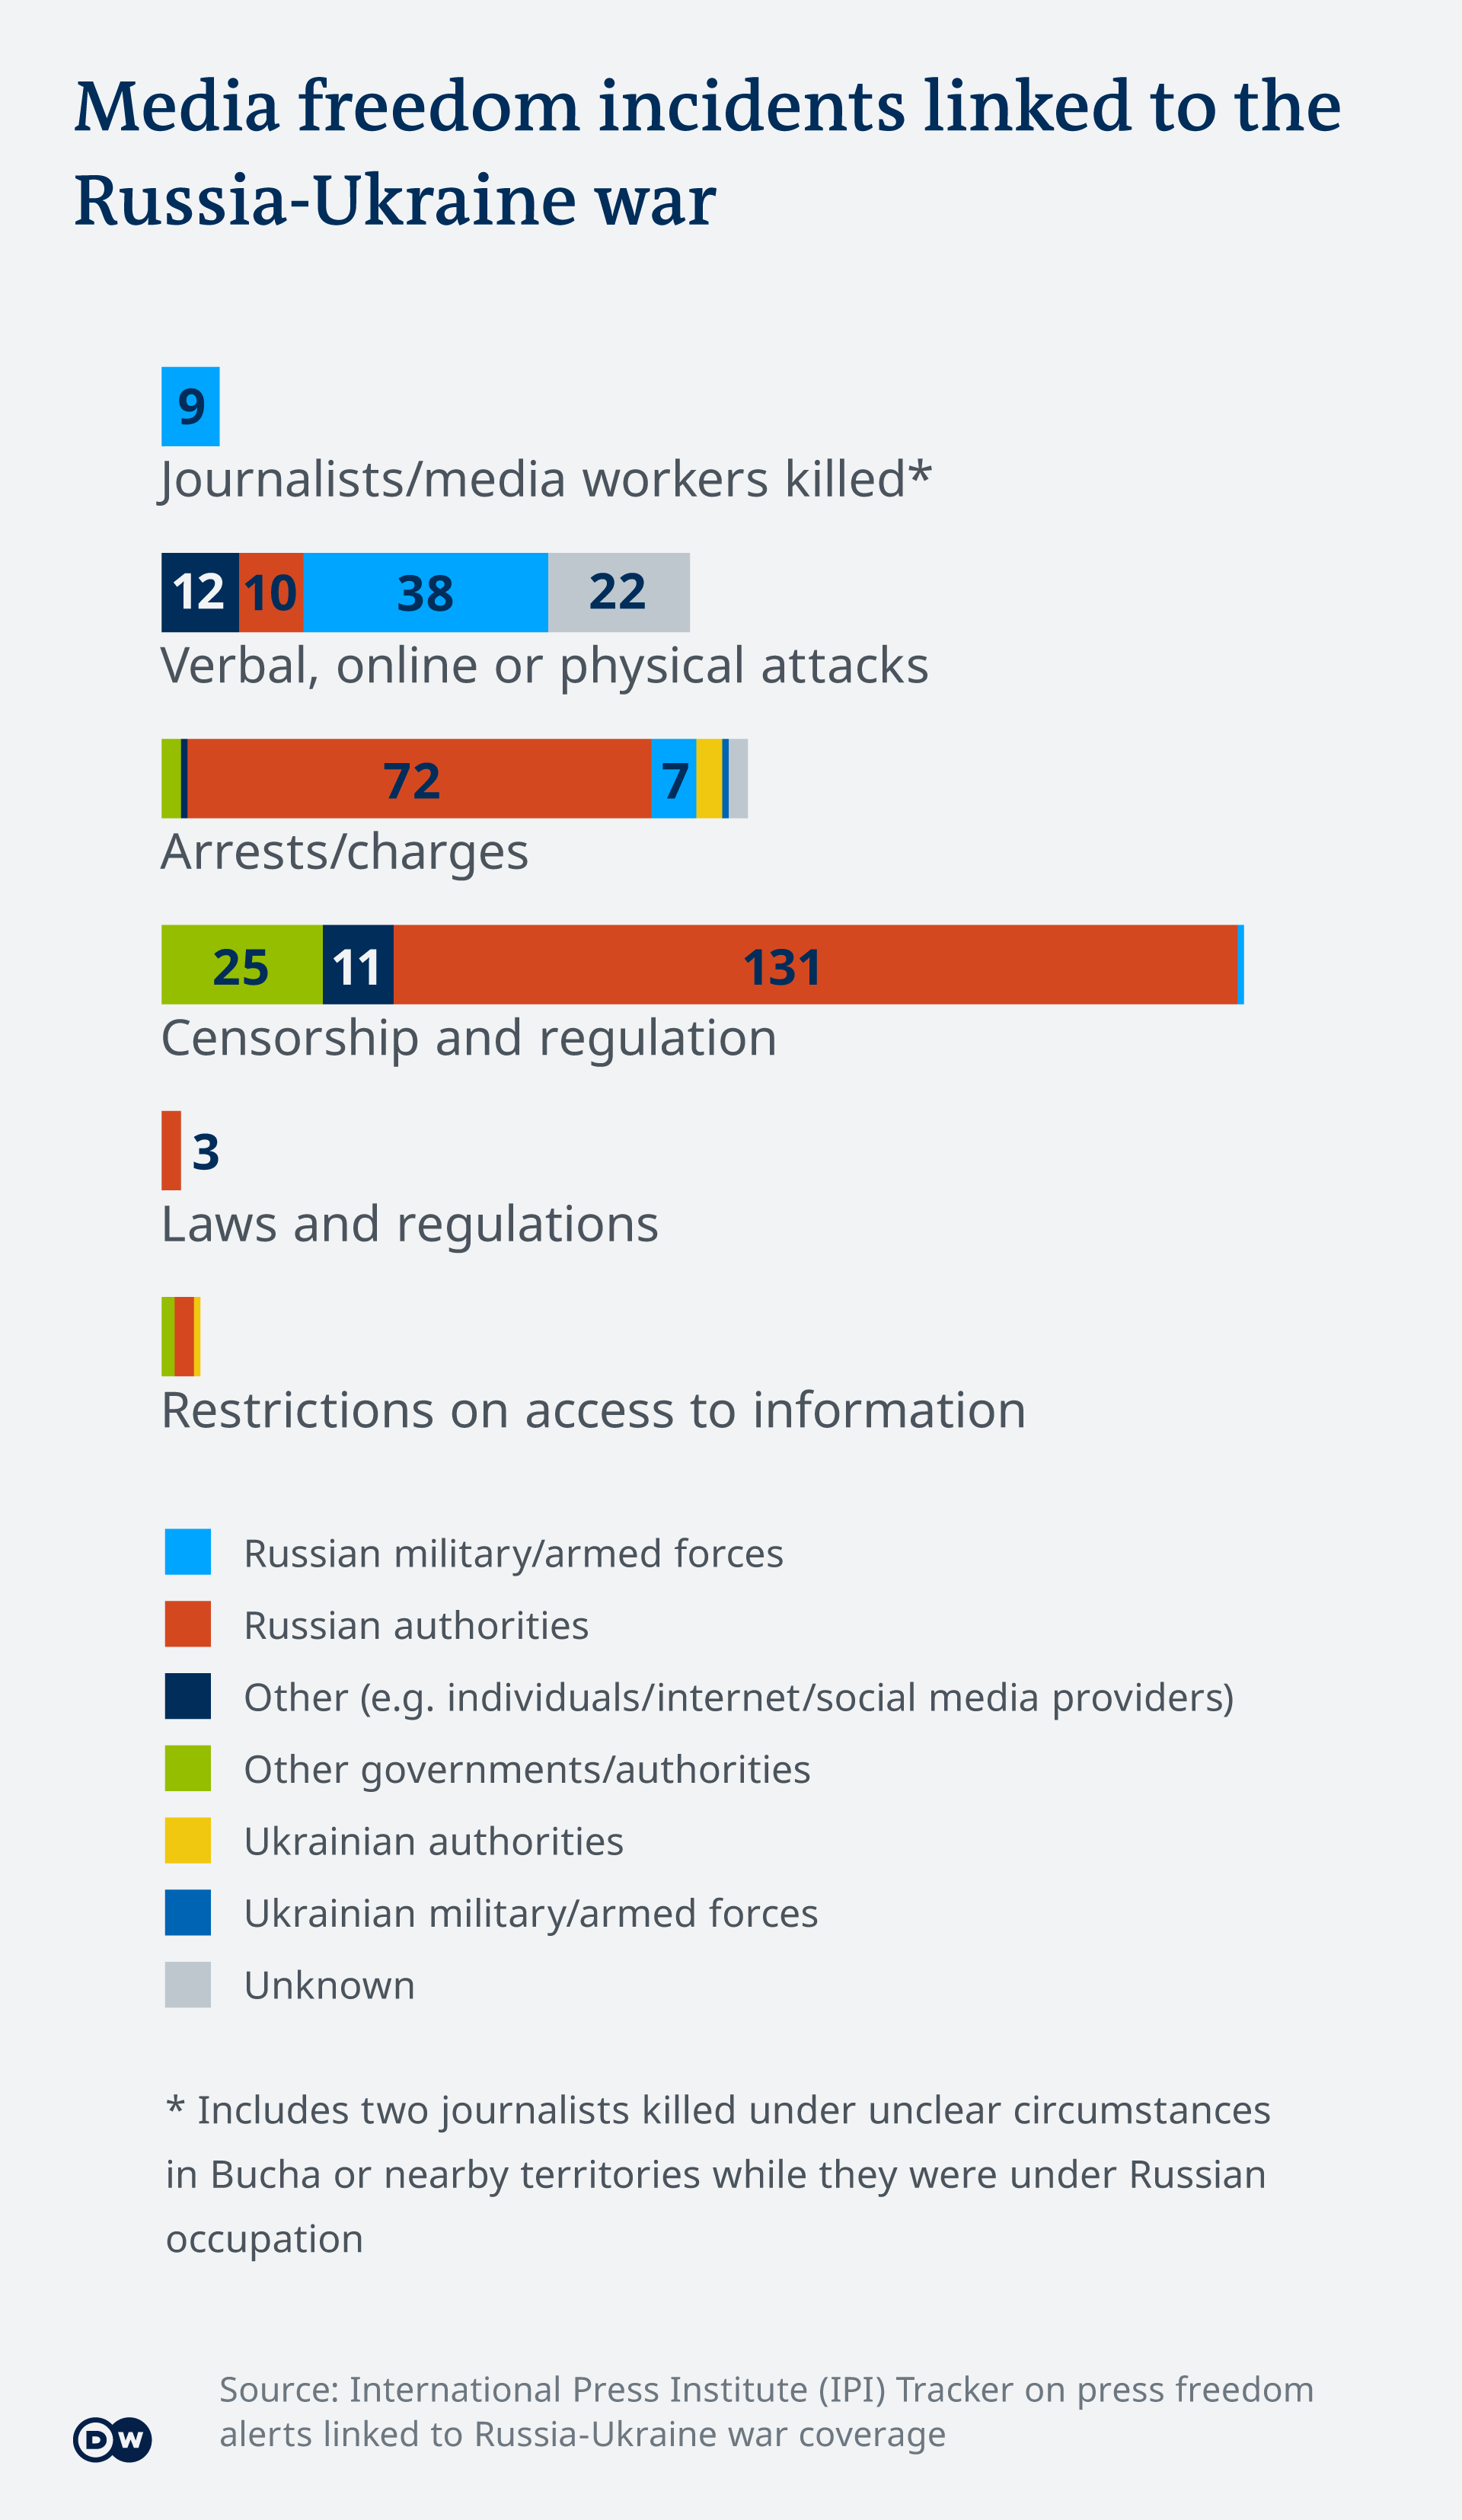 Bar graph indicating media freedom incidents related to the war in Ukraine